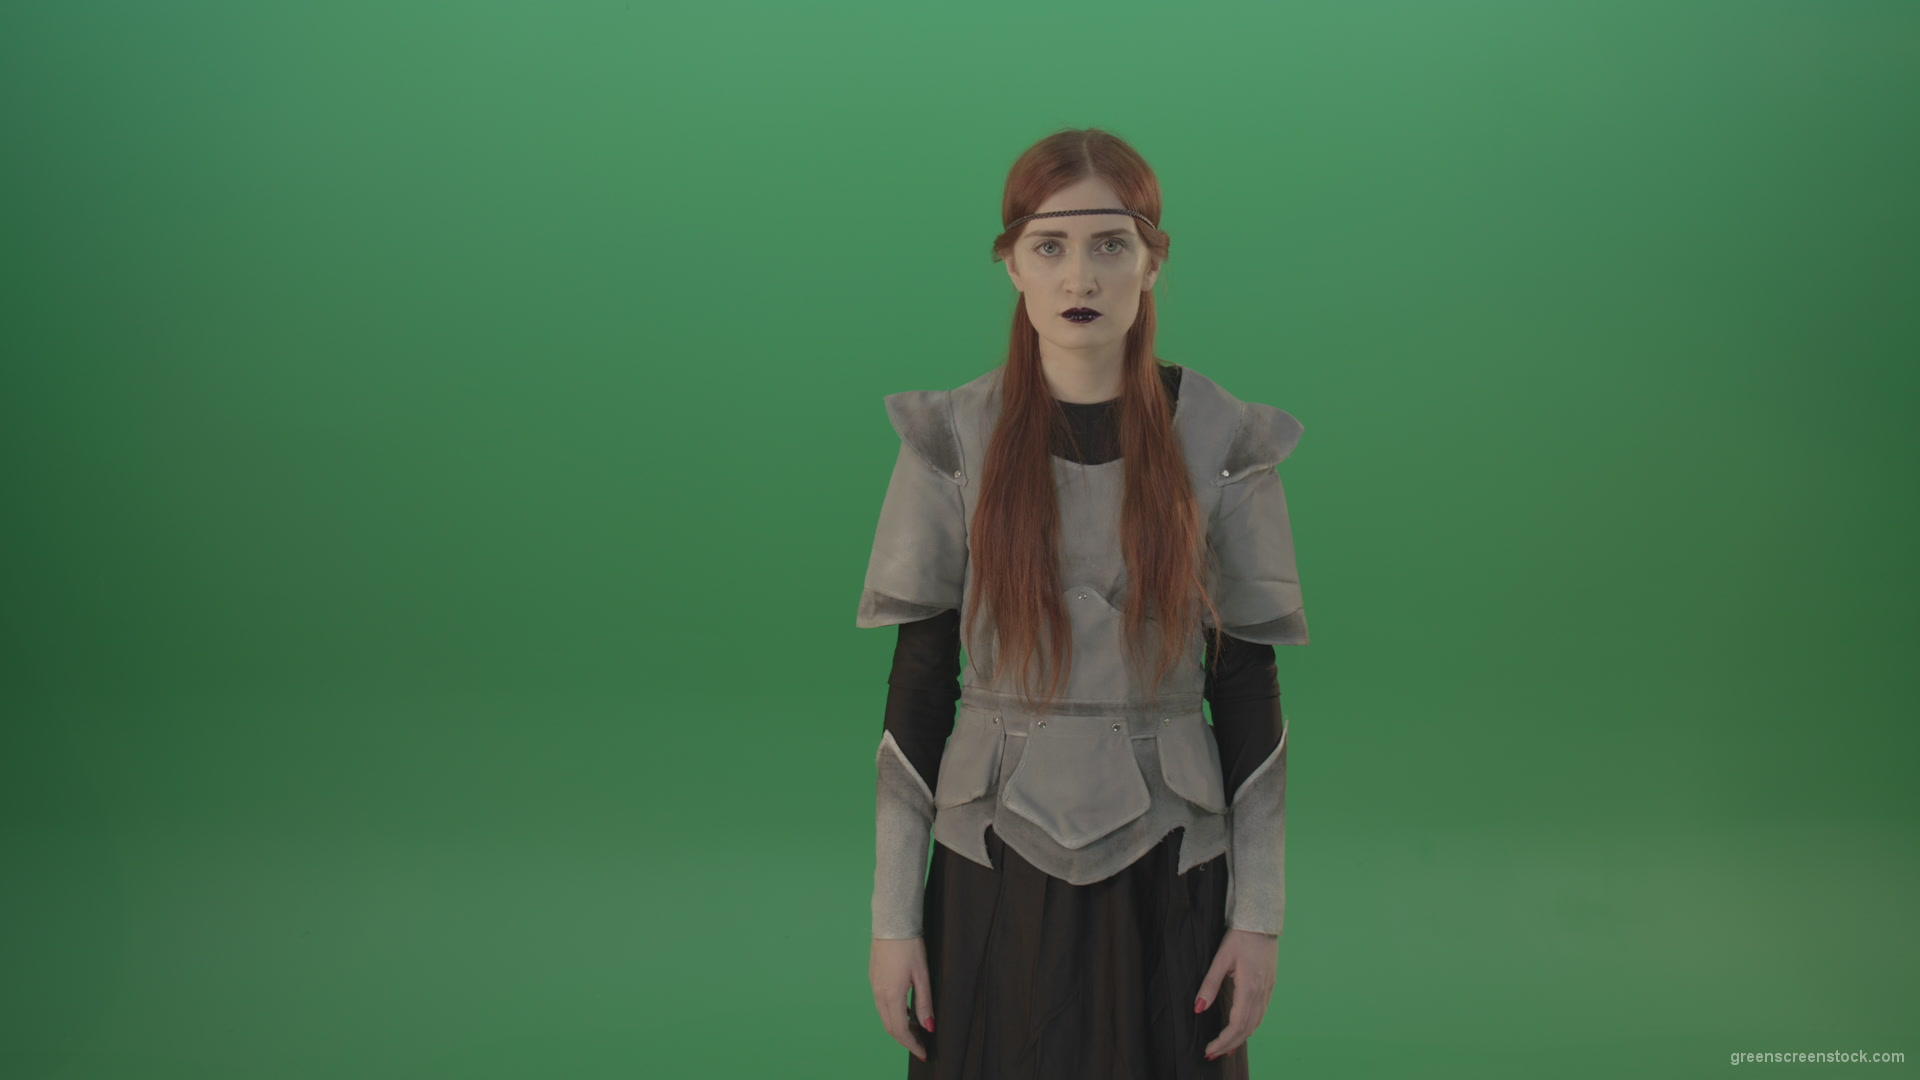 Witch-aggressively-shouts-at-the-camera-provoking-the-viewer_001 Green Screen Stock